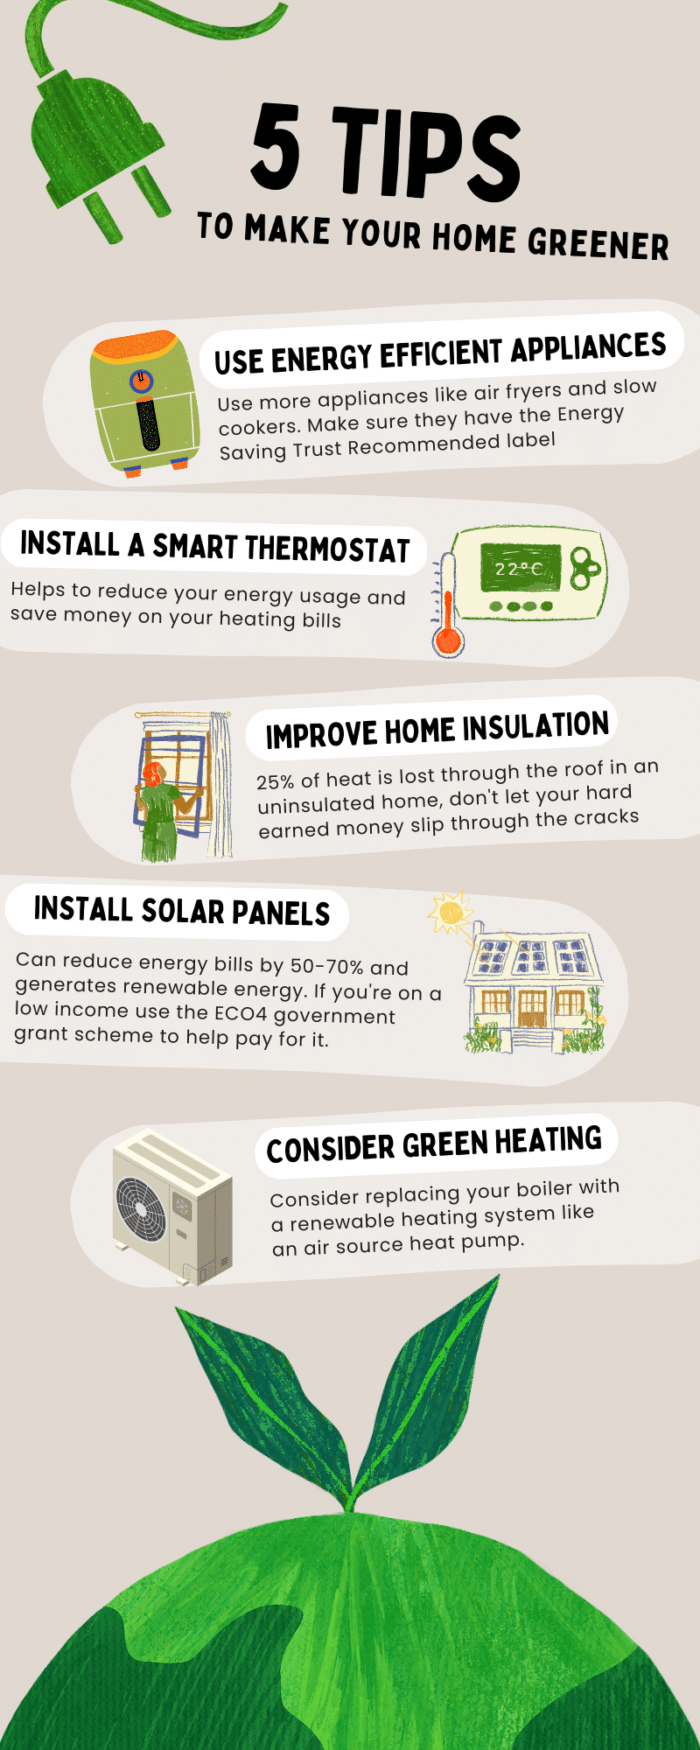 5 tips to make your home greener this St. Patrick's Day